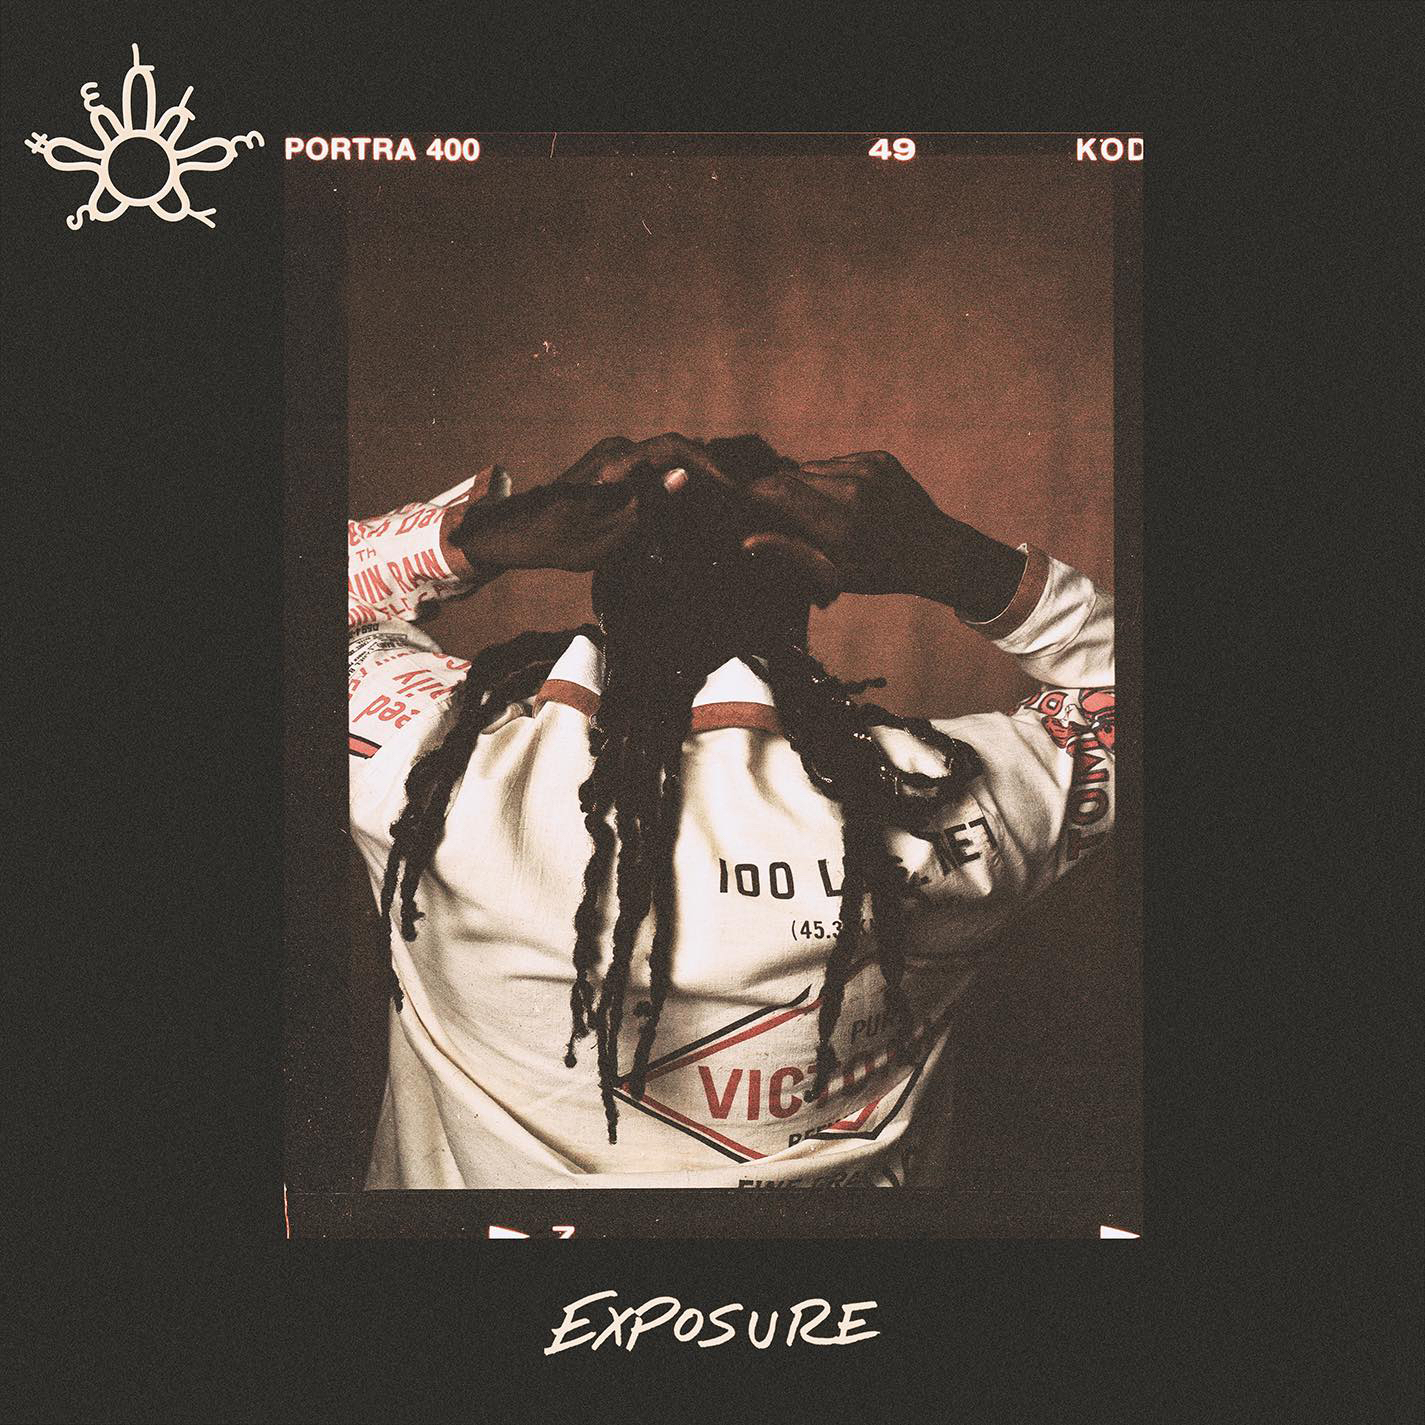 Shelley (FKA D.R.A.M.) Releases His New Single “Exposure”